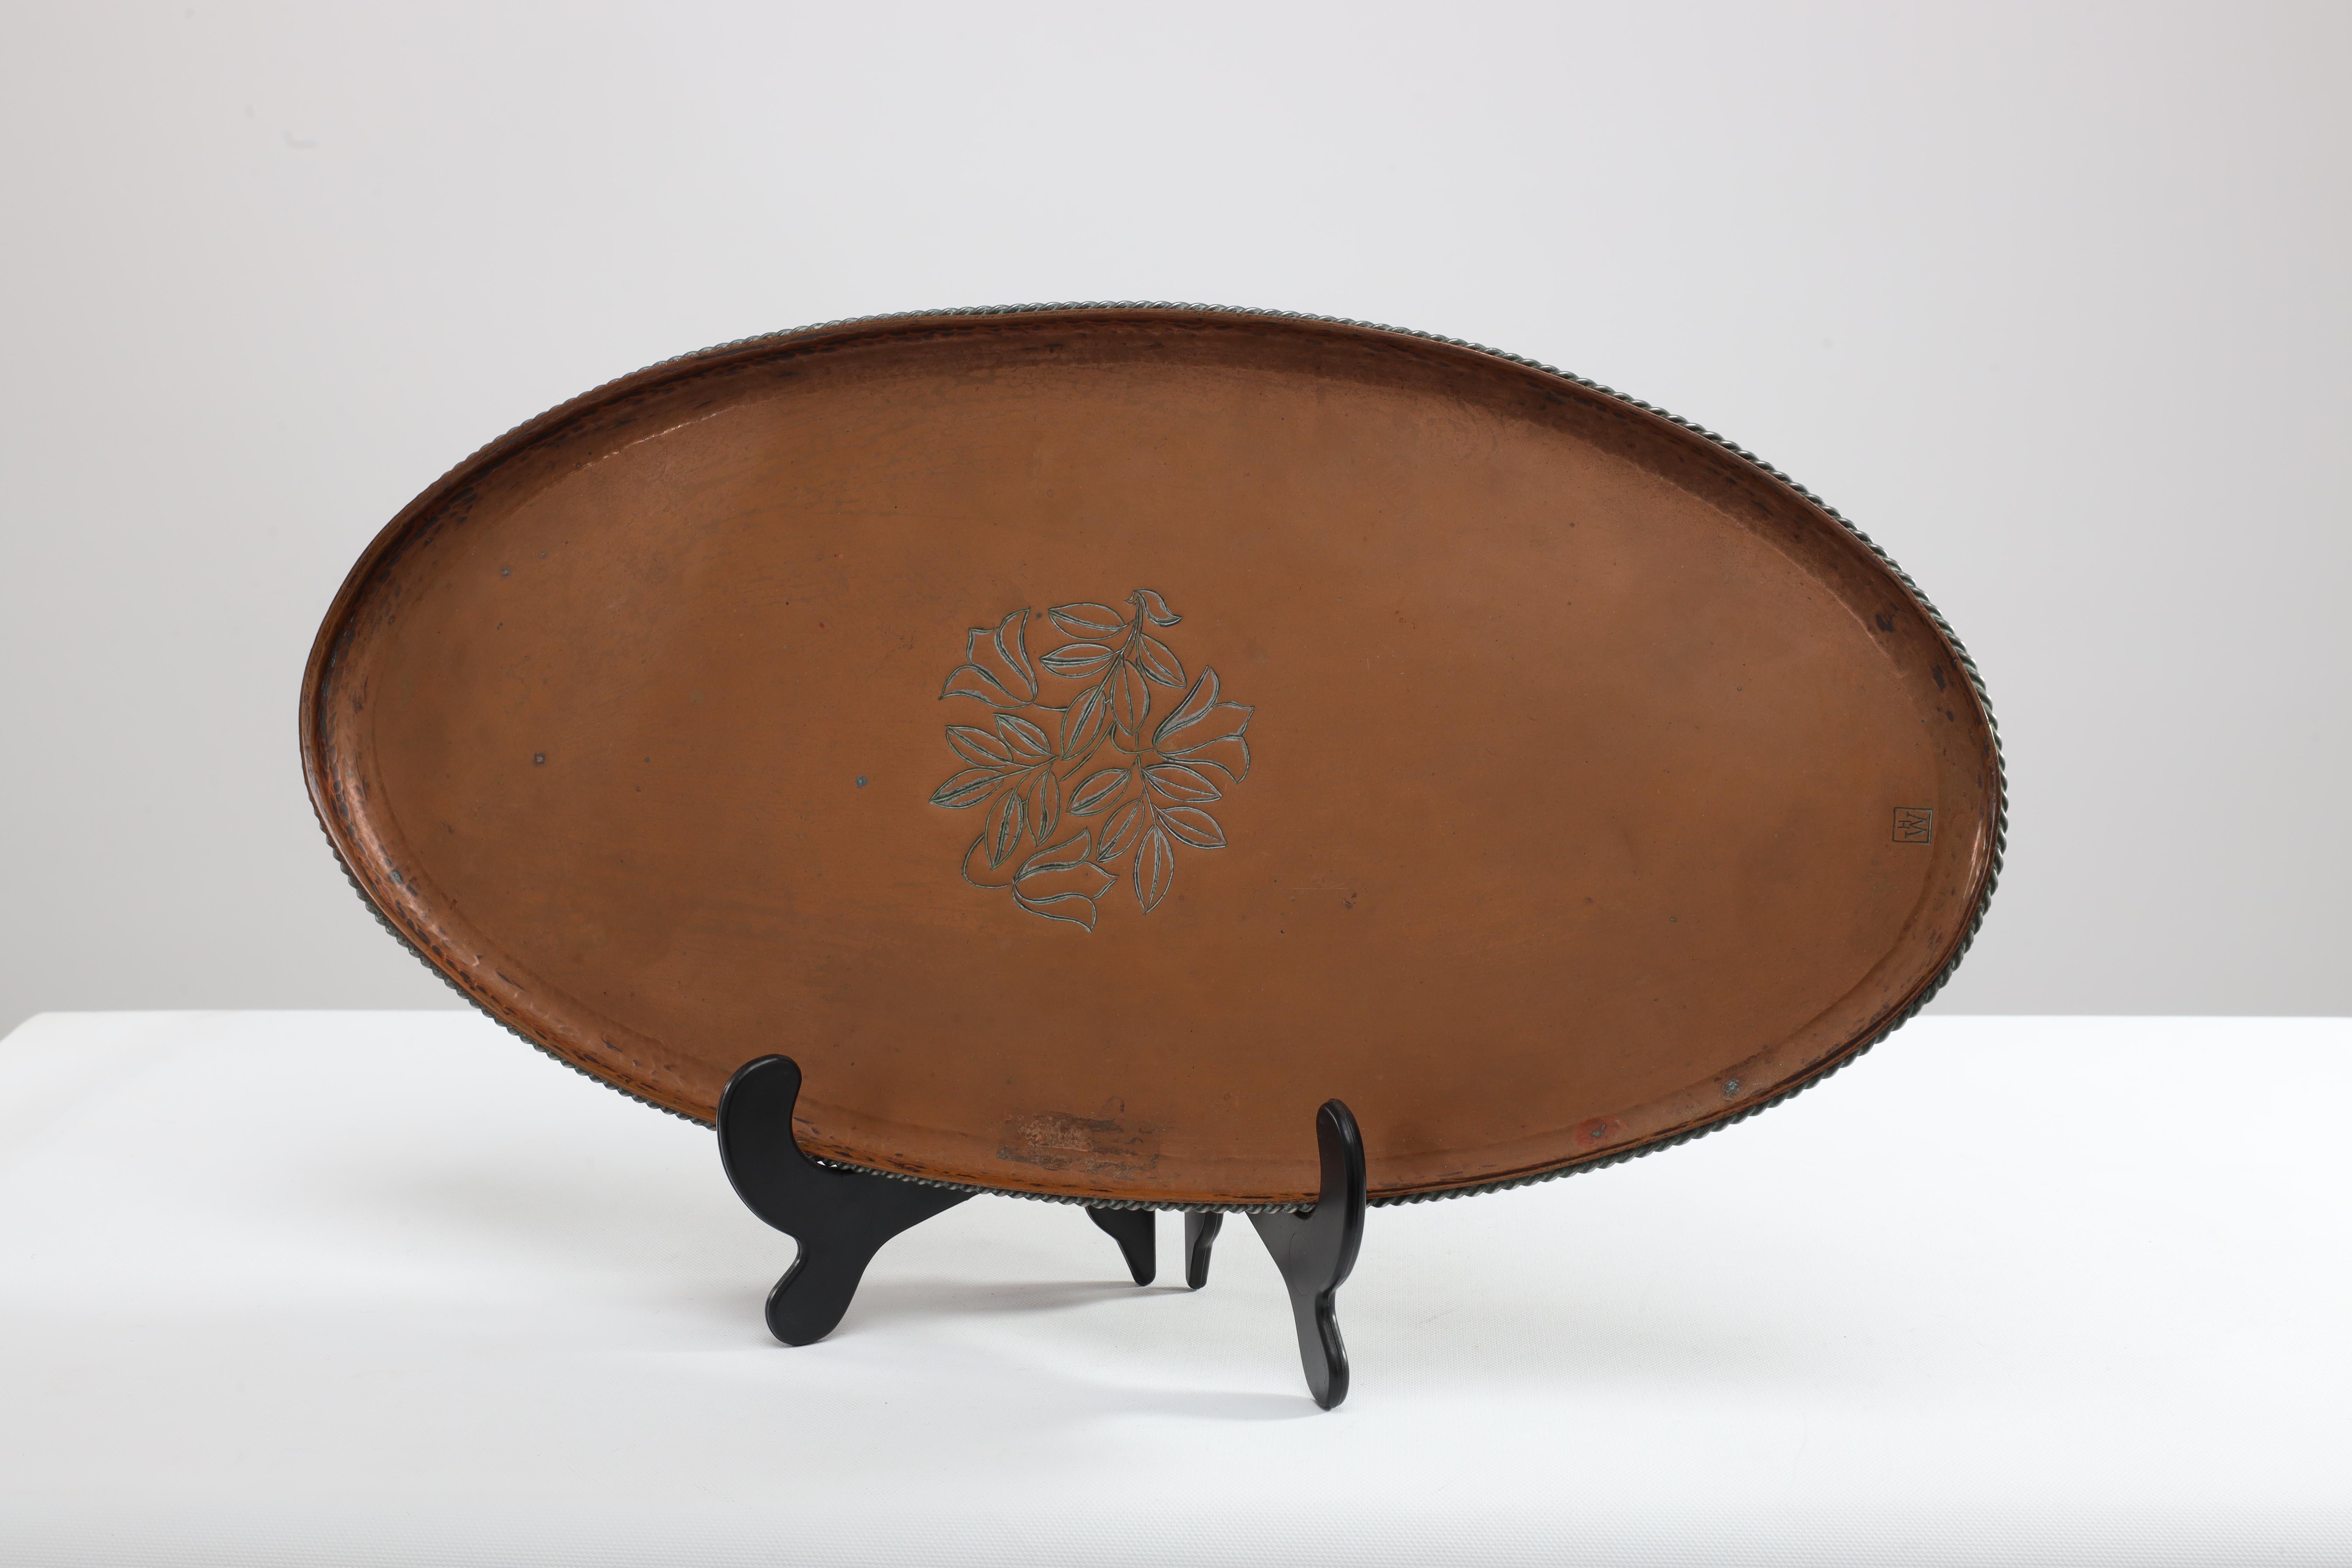 Hugh Wallis. An Arts & Crafts oval copper tray with rope twist edge and chased floral decoration to the centre. Stamped HW in a square. Hugh Wallis was based in Altrincham, near Manchester in the North-West of England, a highly skilled artist and